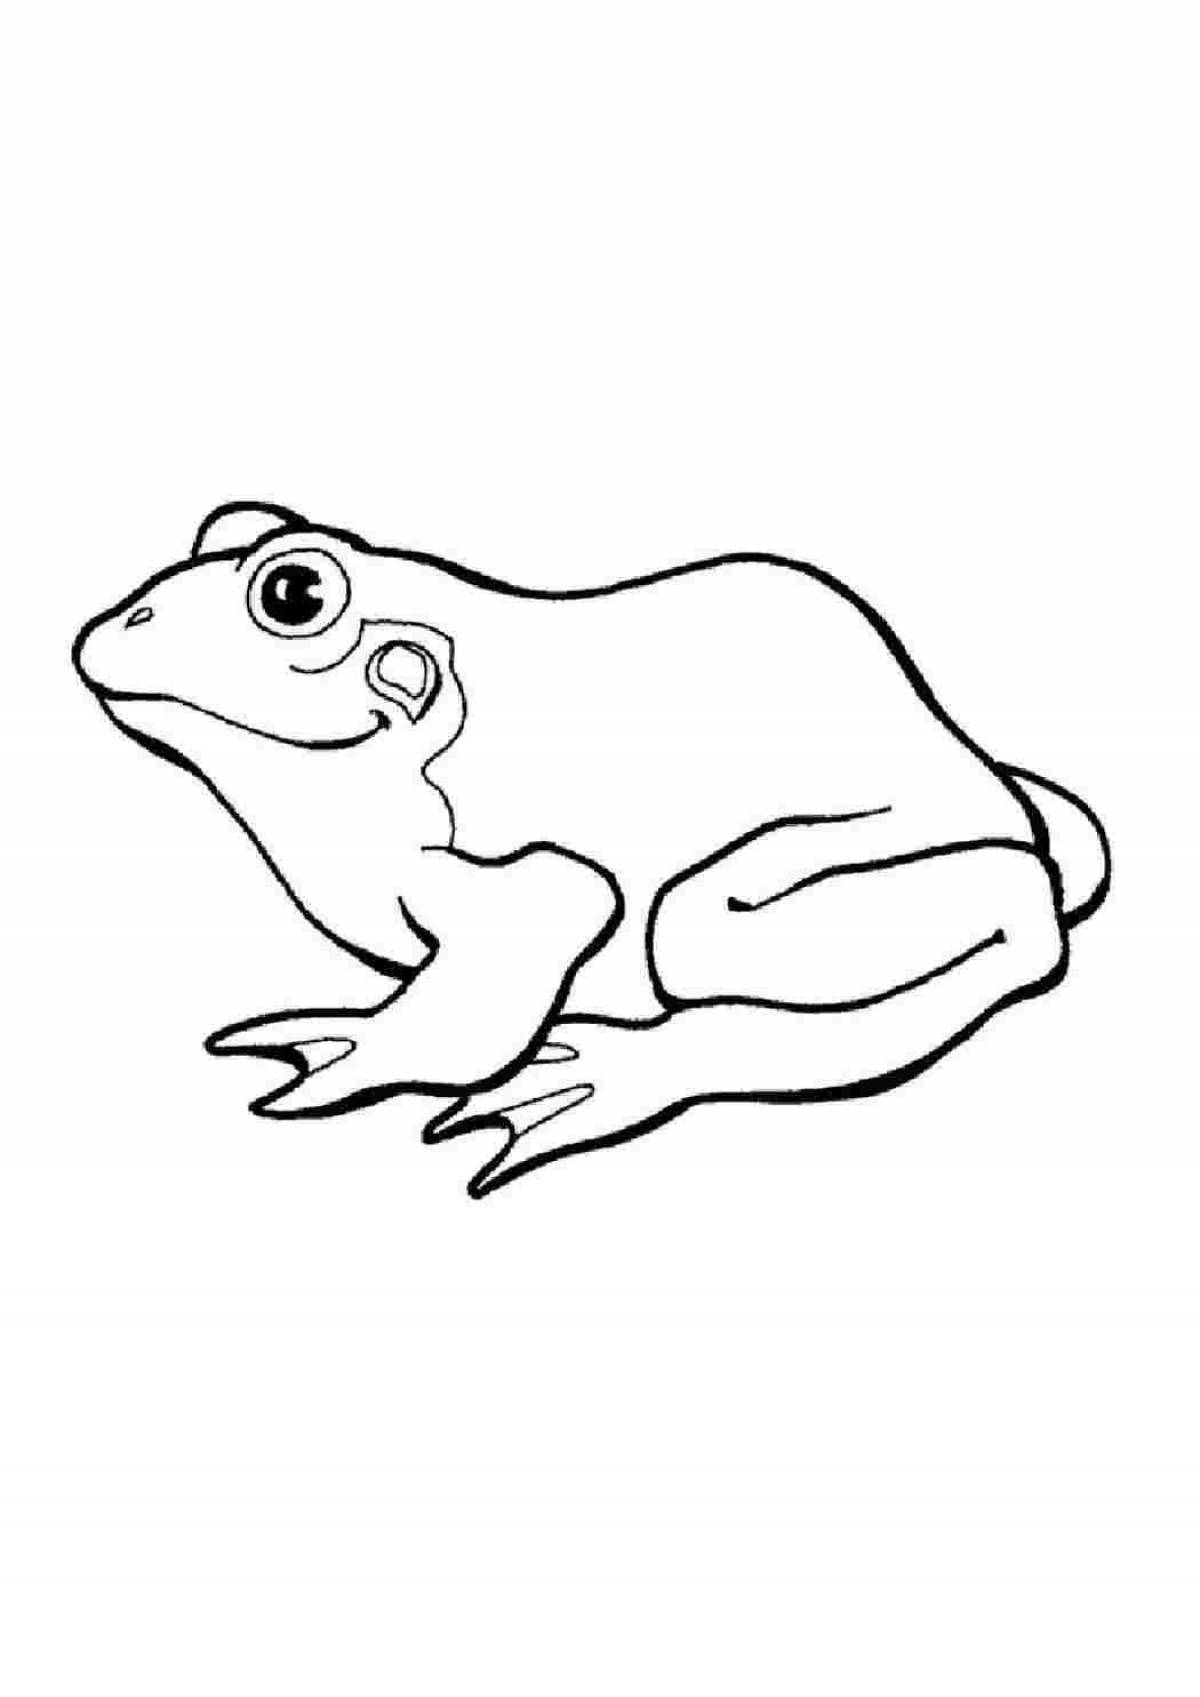 Humorous drawing of a frog for children